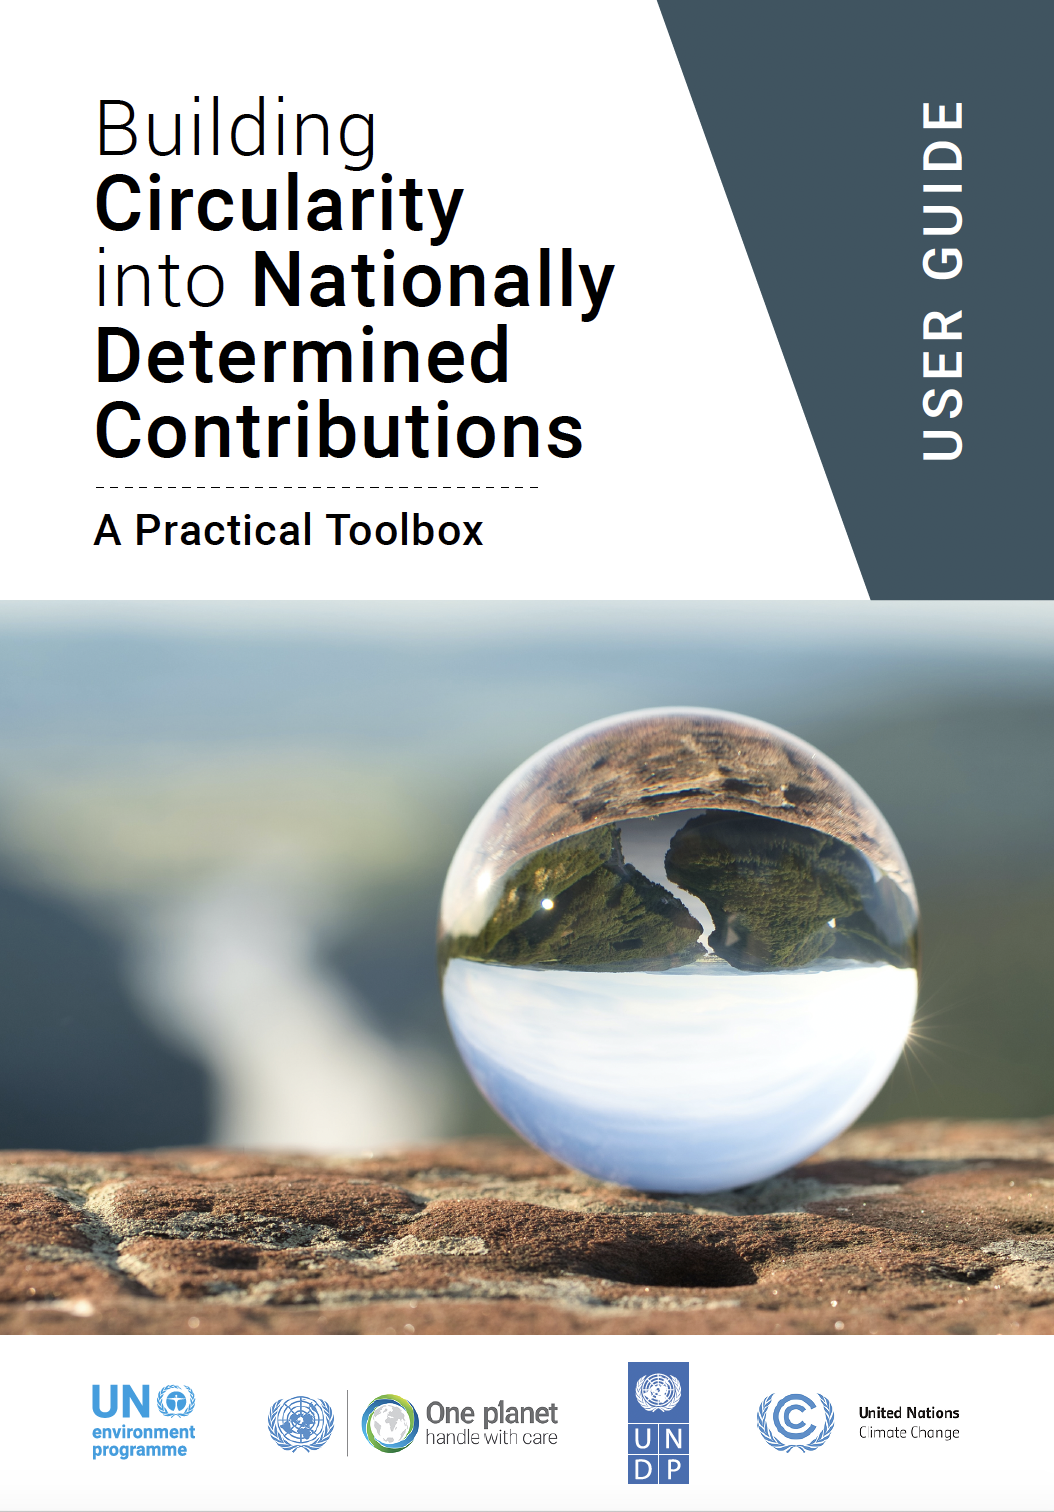 Cover page of Building Circularity into Nationally Determined Contributions (NDCs) – A Practical Toolbox